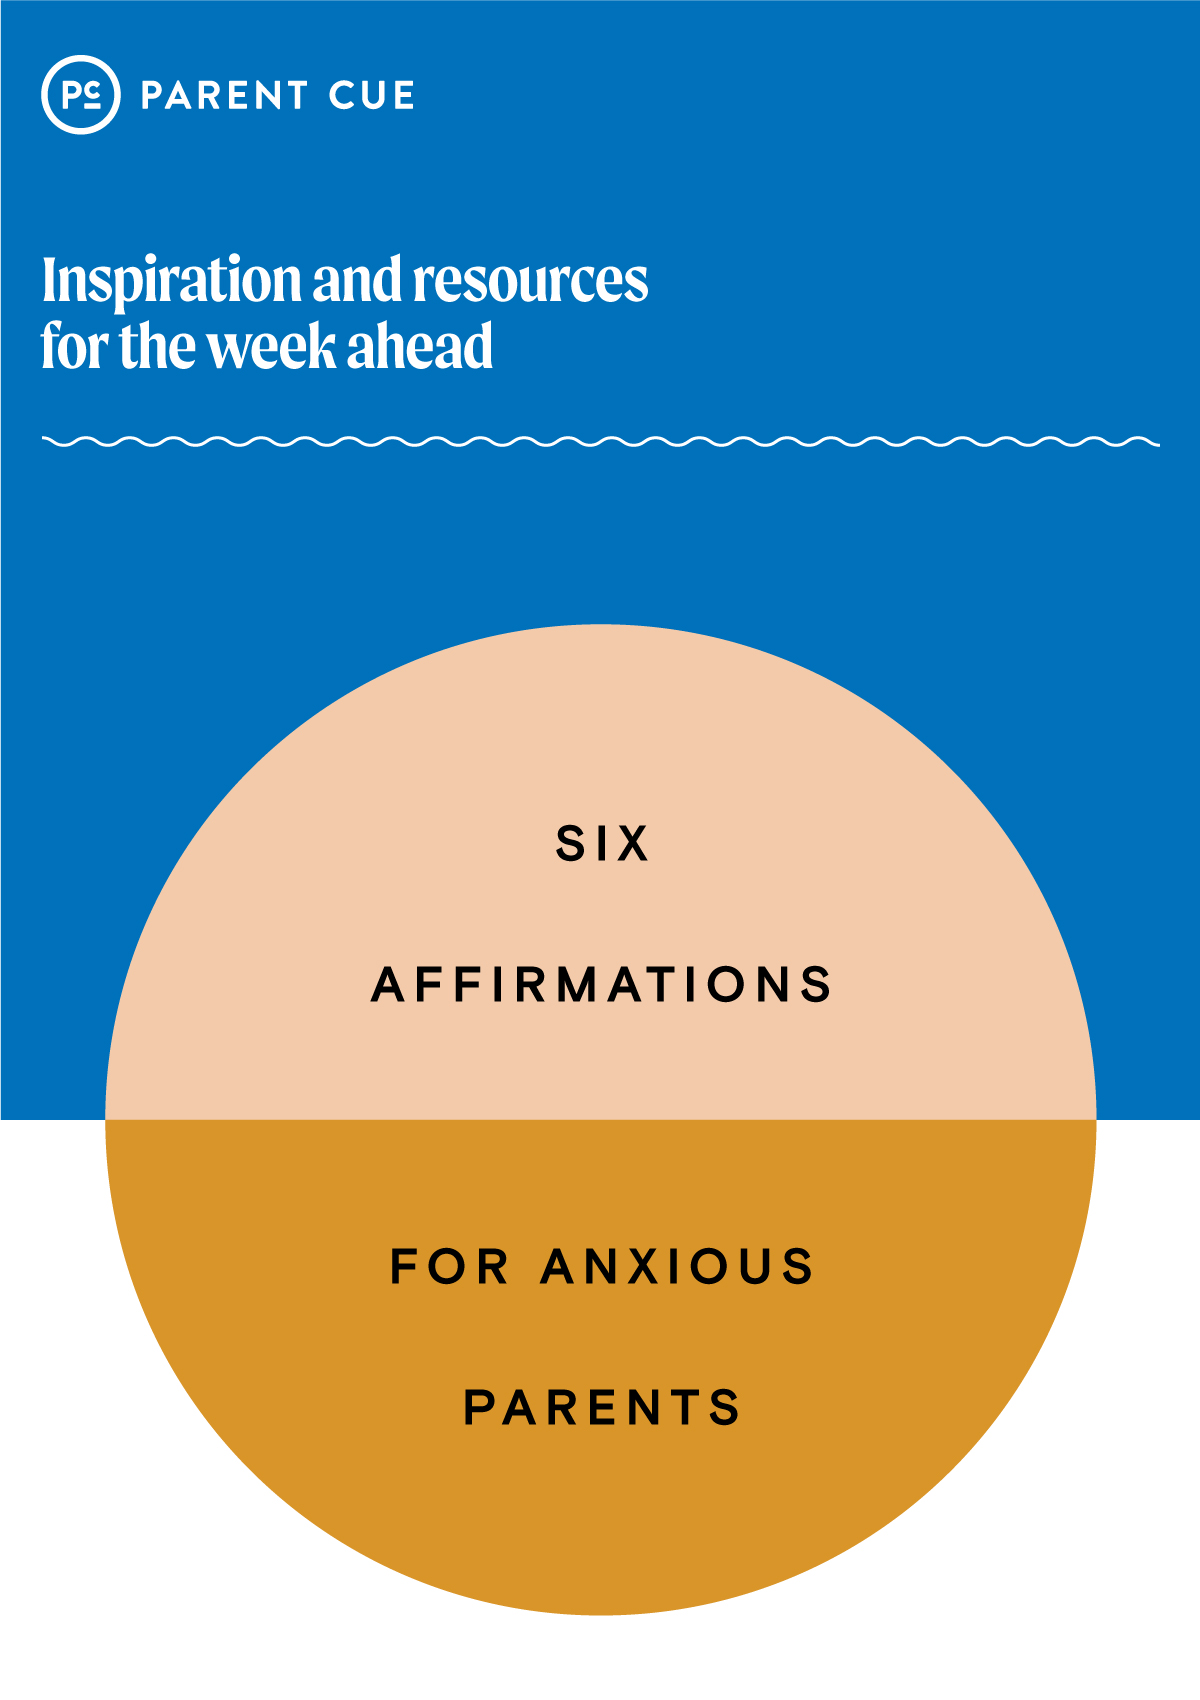 6 Affirmations for Anxious Parents